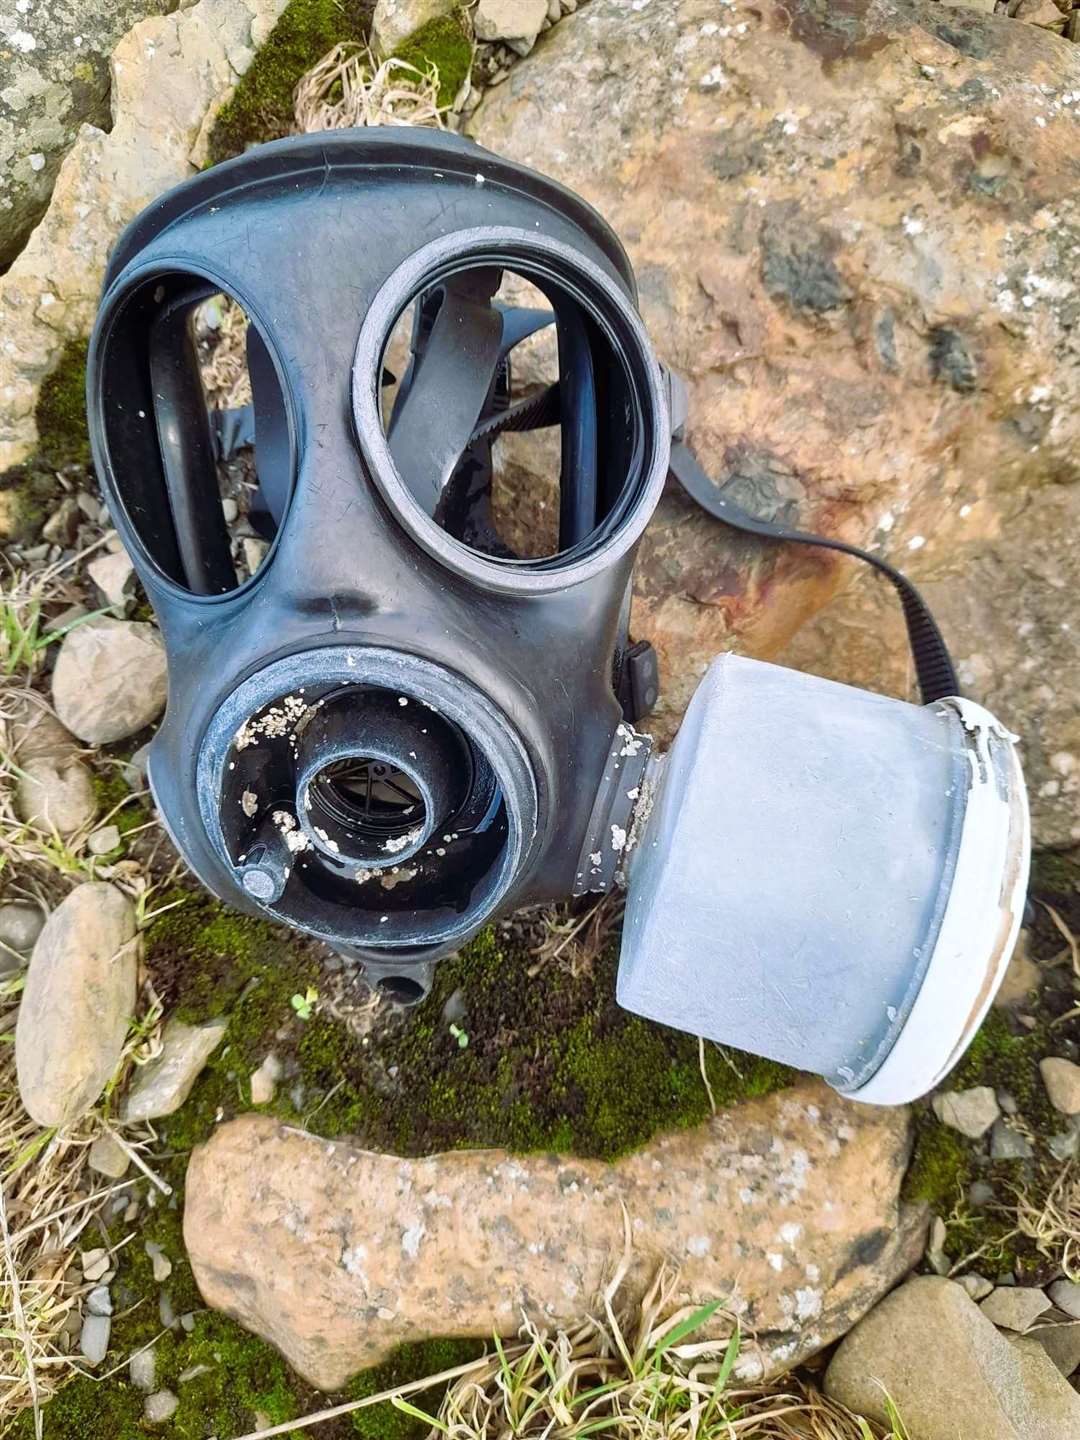 Gas mask found at coastal area near Dounreay. Picture: Caithness Beach Cleans